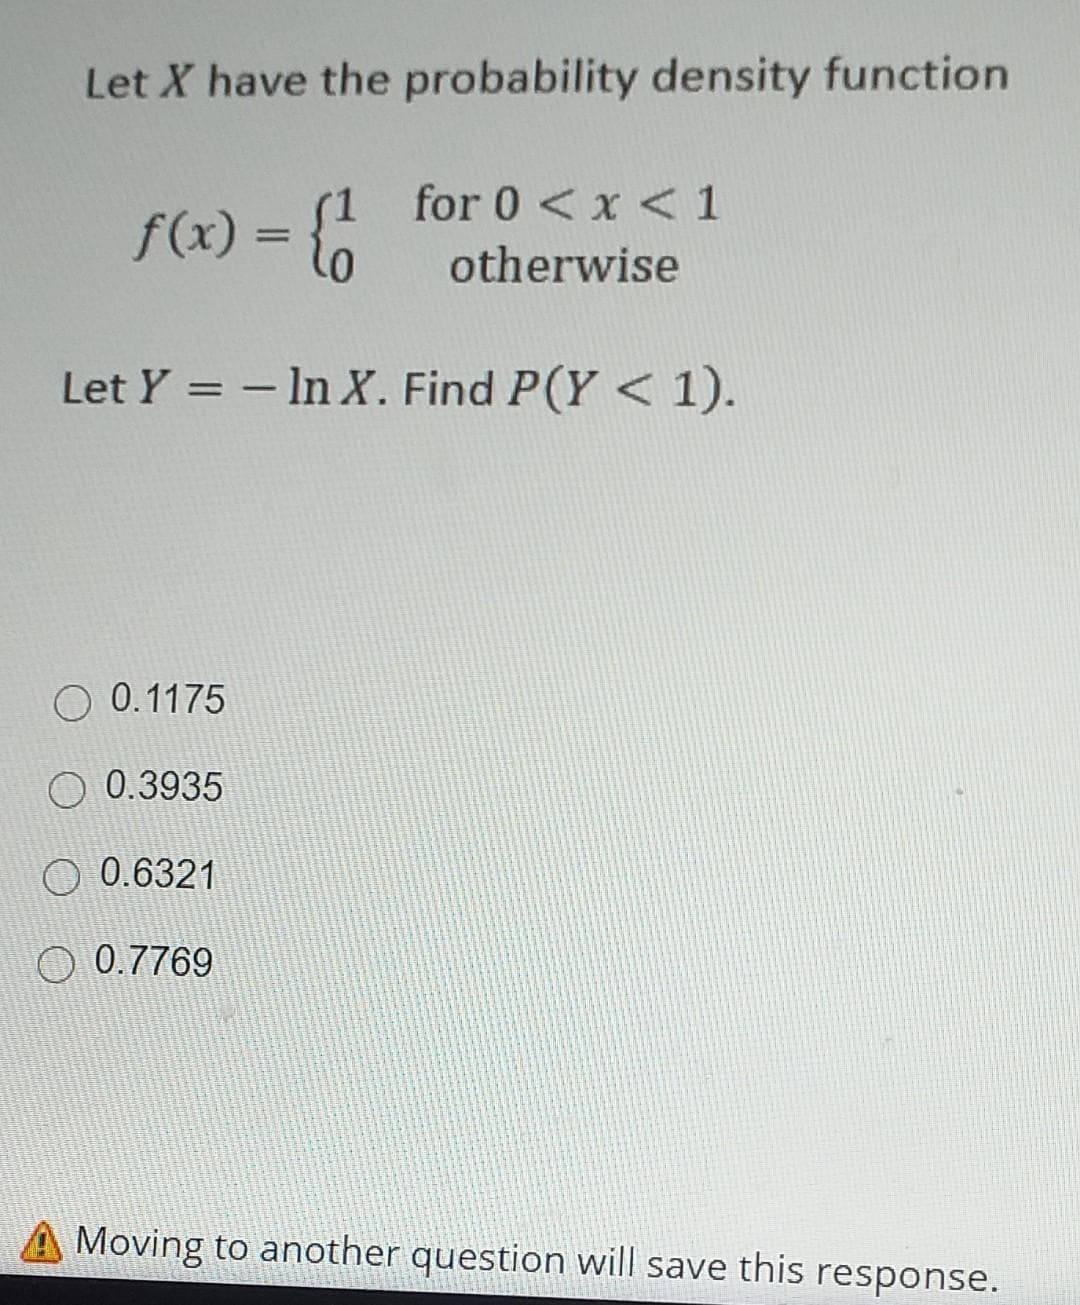 Let X have the probability density function
(1 for 0 < x < 1
f(x) = lo
%3D
otherwise
Let Y = - In X. Find P(Y < 1).
O 0.1175
O 0.3935
O 0.6321
O 0.7769
Moving to another question will save this response.
